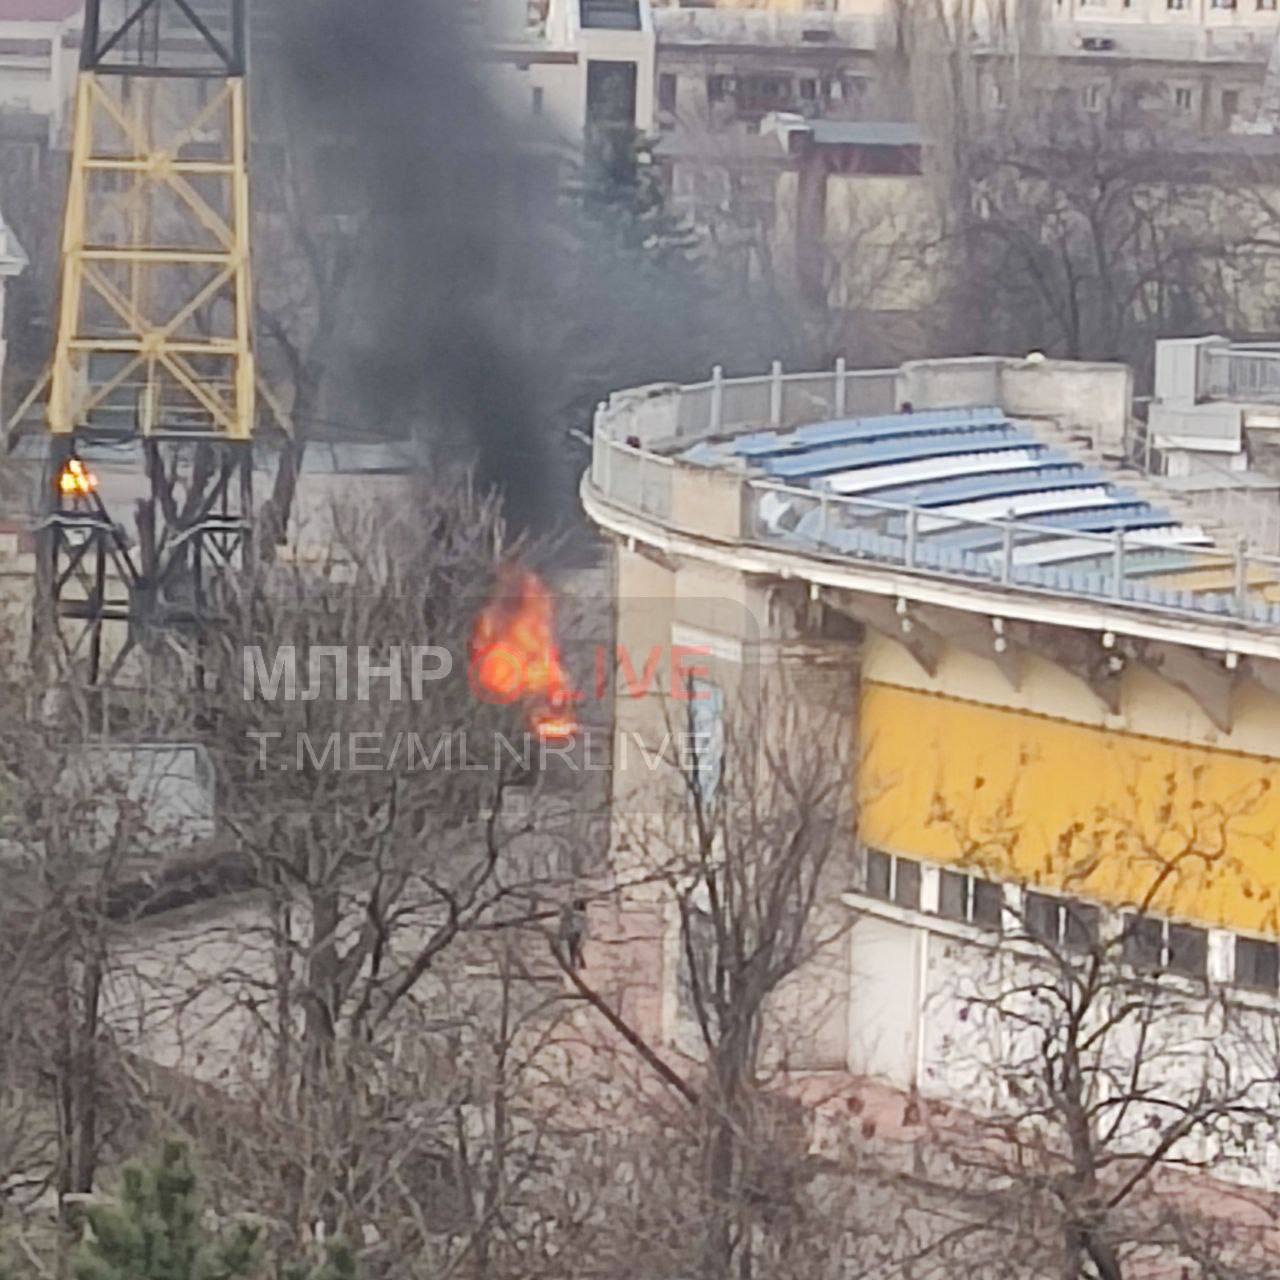 In the occupied Luhansk, the car of the 'Luhansk People's Republic deputy' was blown up: an assassination attempt on him had been made before. Photos and videos